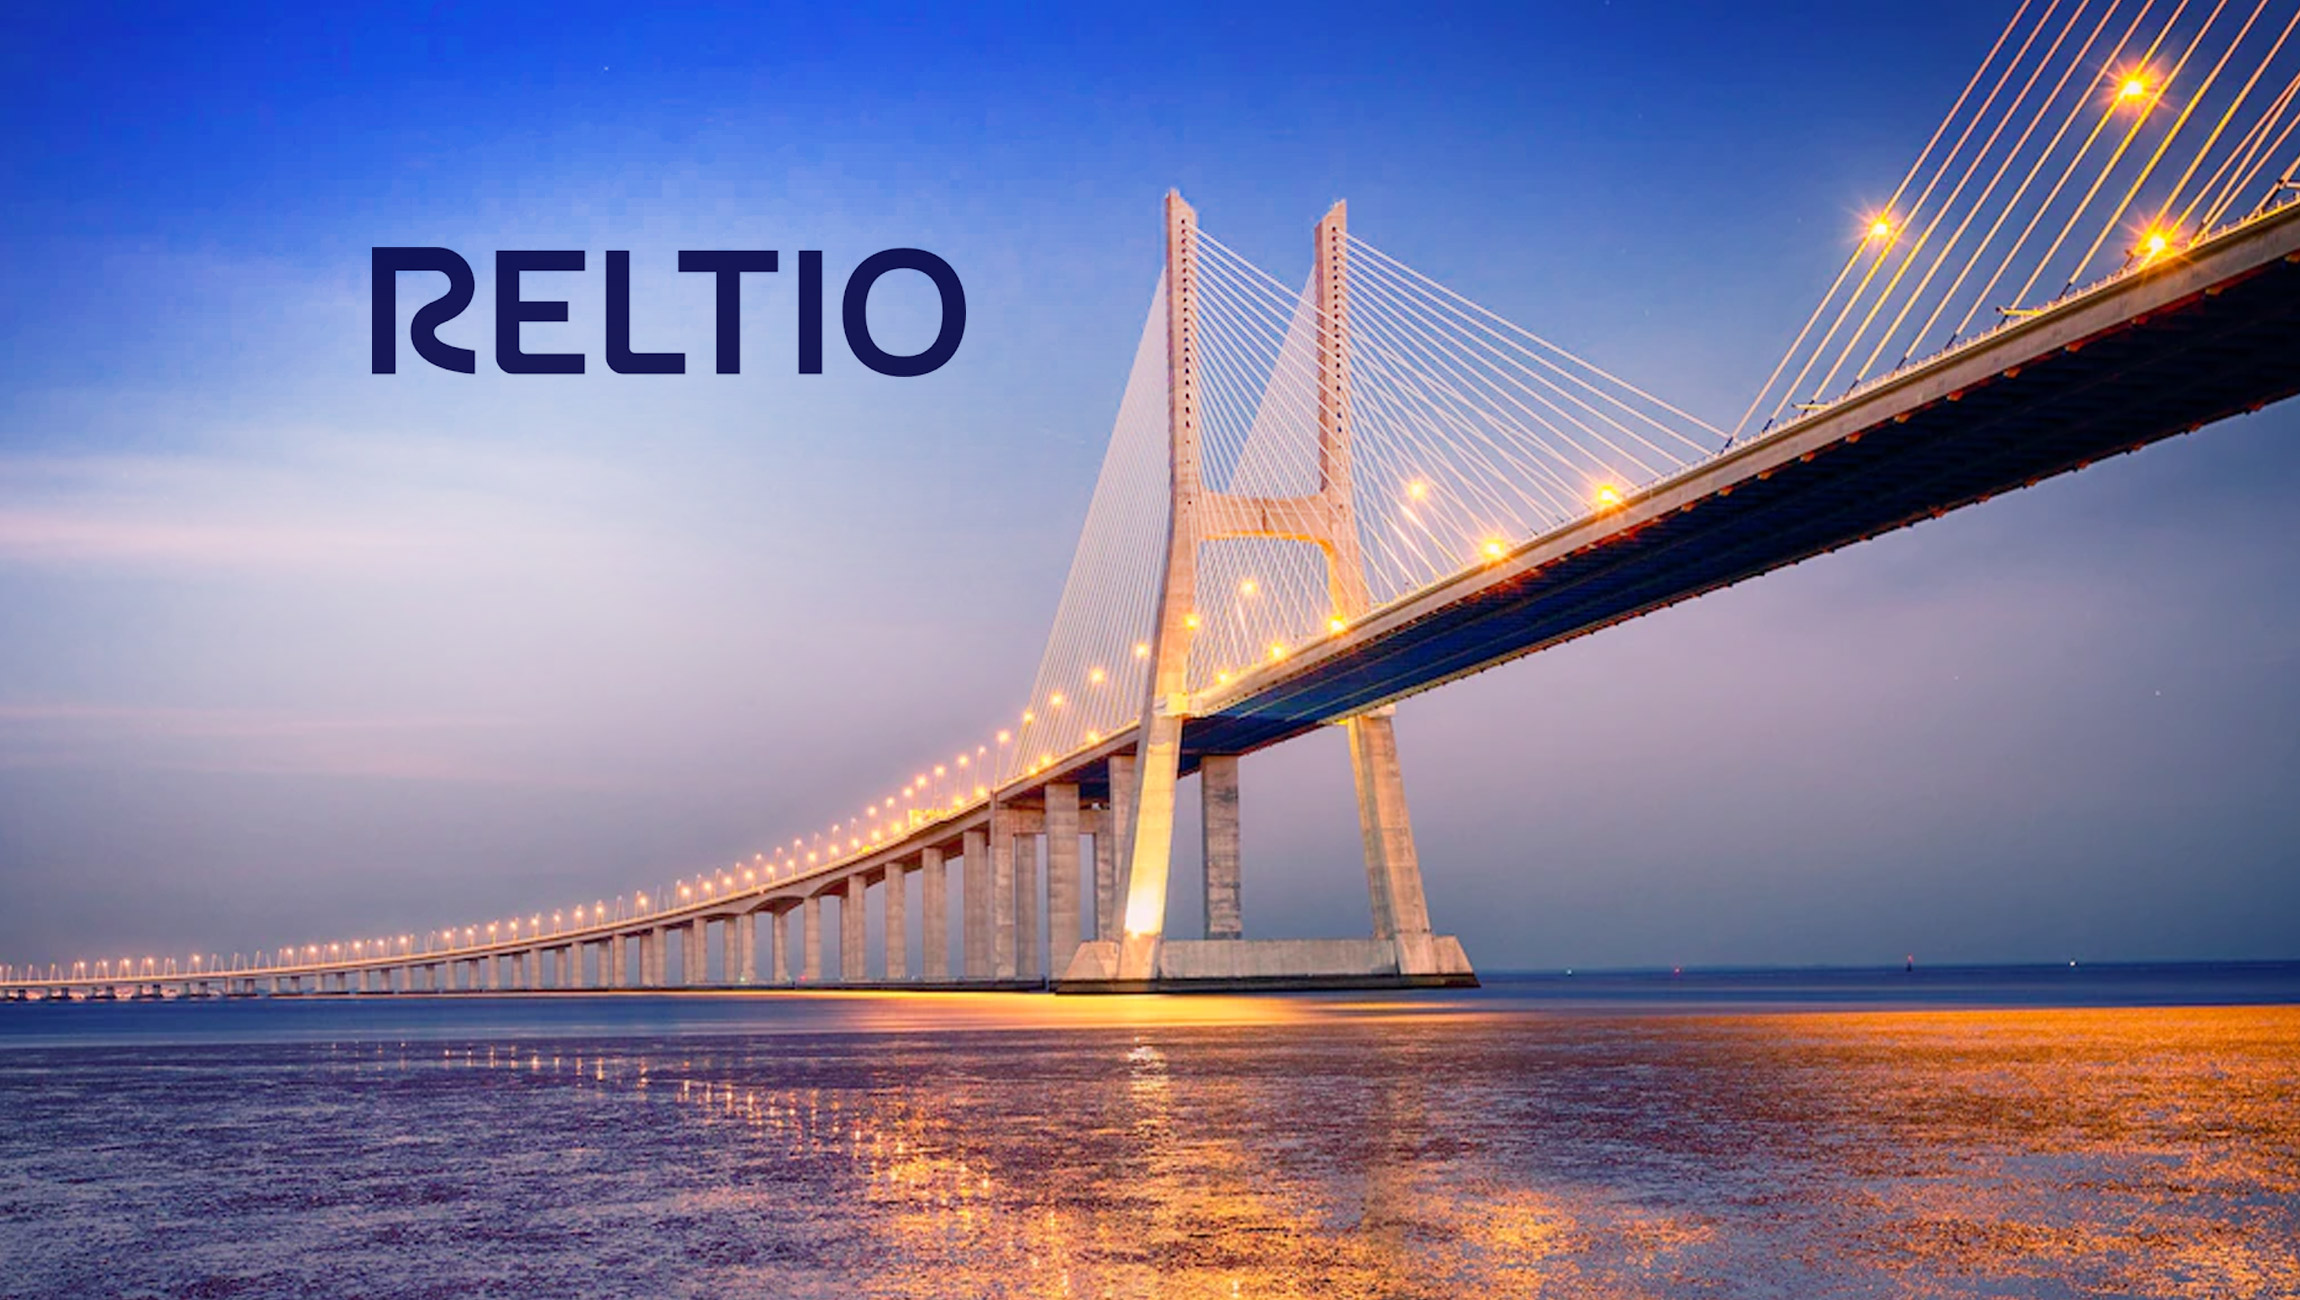 Reltio Expands Global Footprint, Opens New Office in Lisbon, Portugal